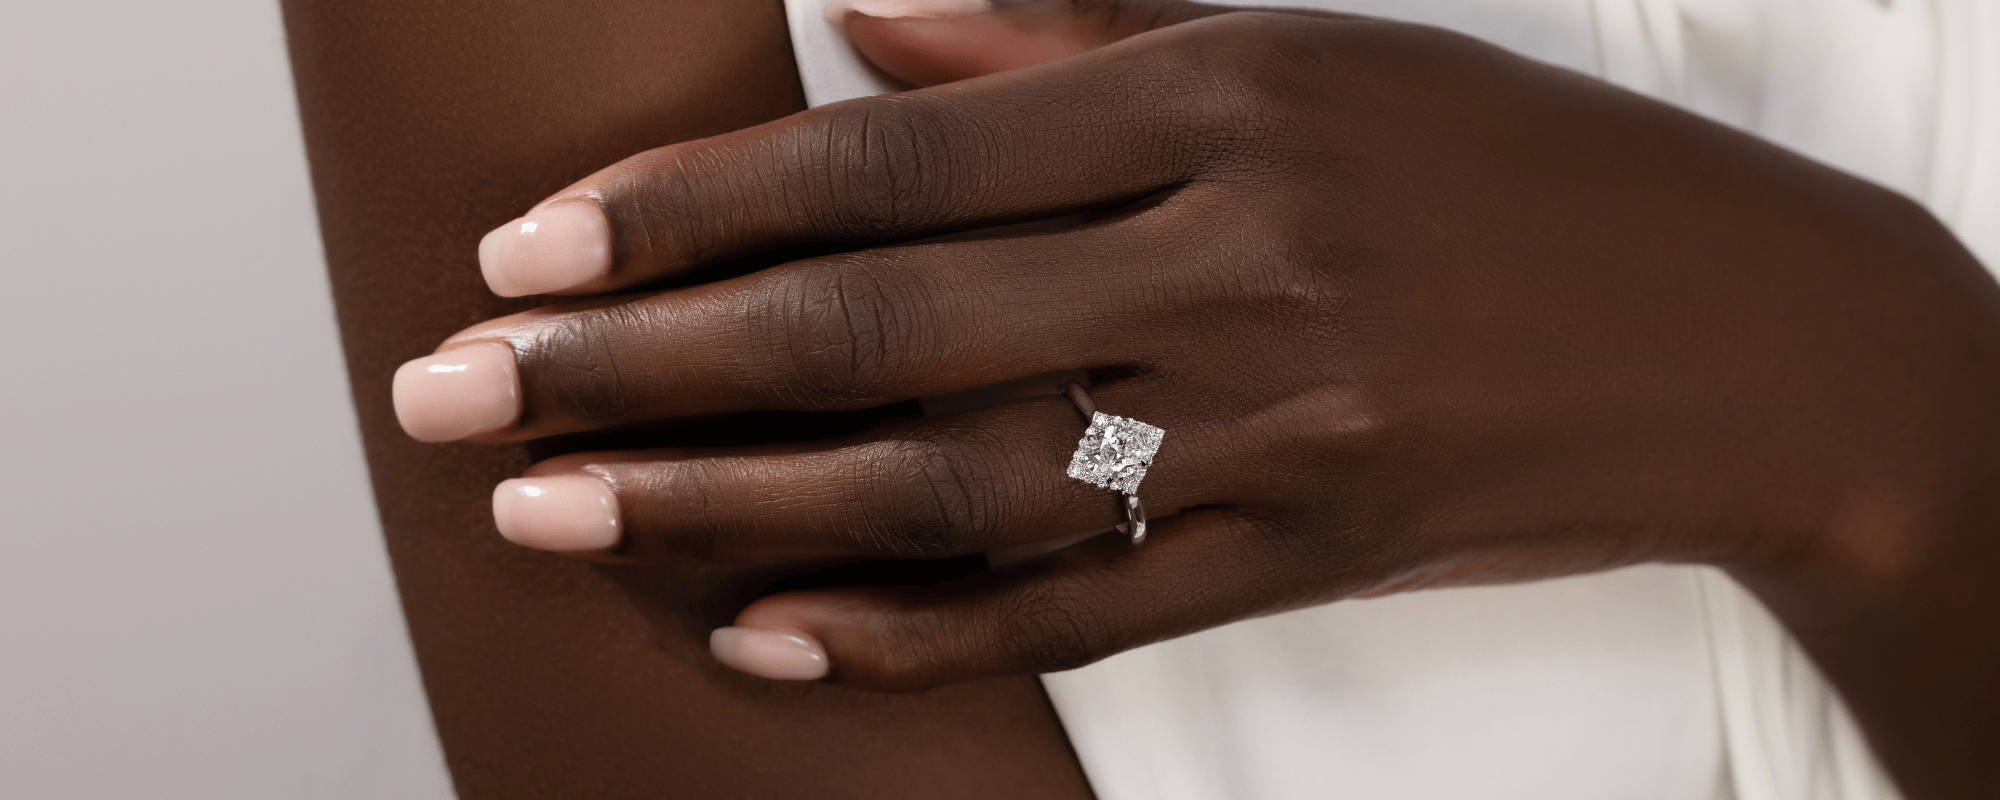 Top 10 Non-Traditional Engagement Rings